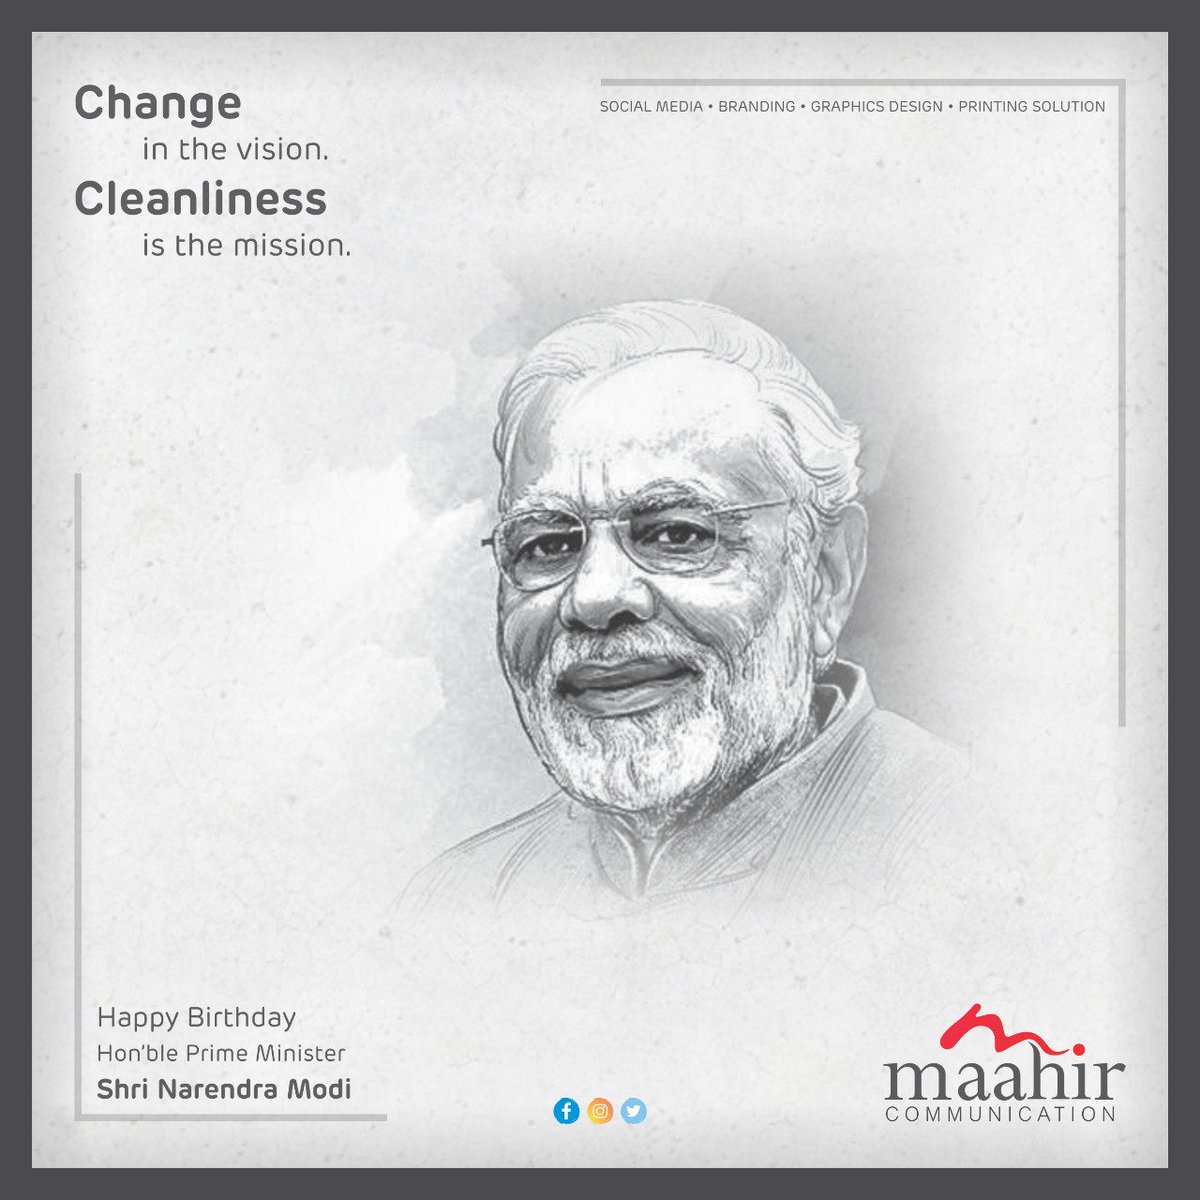 Change in the vision. Cleanliness is the mission.
Happy Birthday Hon’ble Prime Minister
@narendramodi 

#SOCIALMEDIA #BRANDING #GRAPHICSDESIGN #PRINTINGSOLUTION